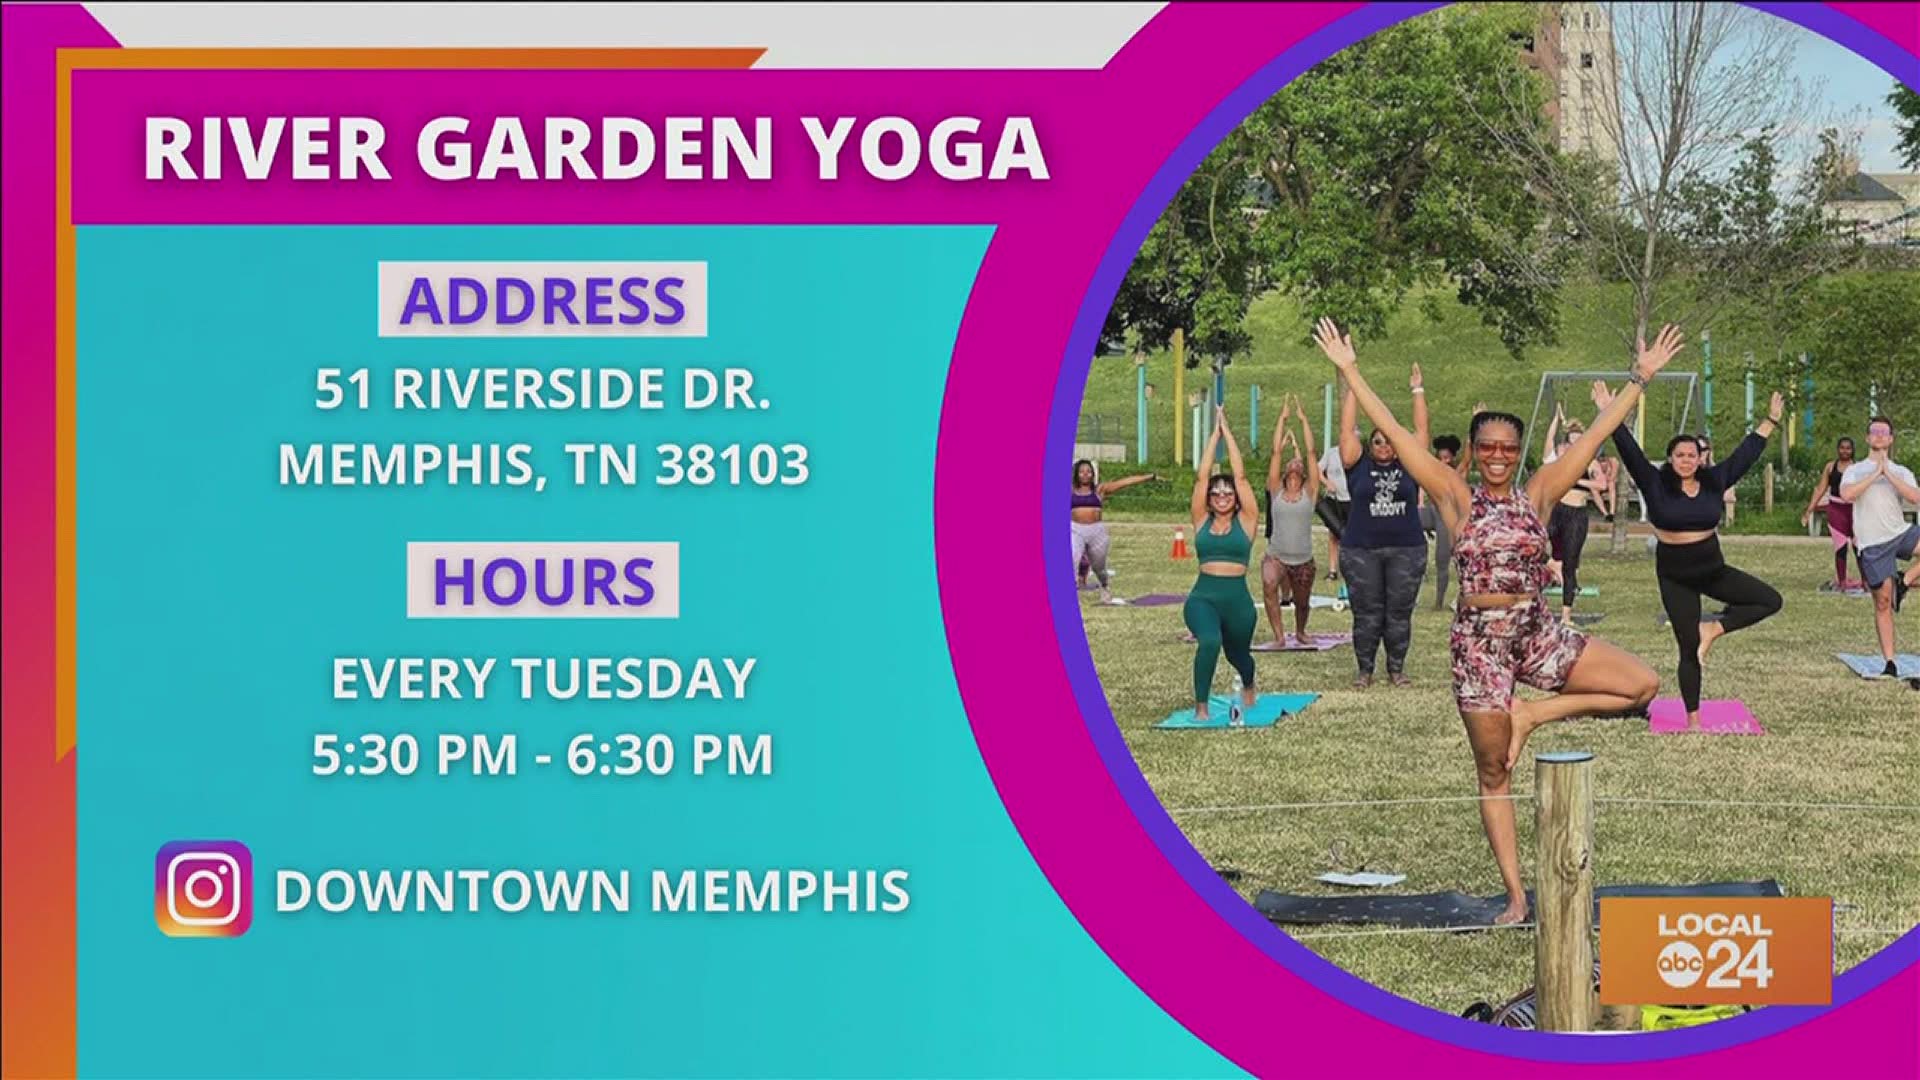 Namaste! If the idea of doing yoga by the Mississippi River sounds relaxing, then check out the River Garden Yoga sessions! All ages and levels are welcome!